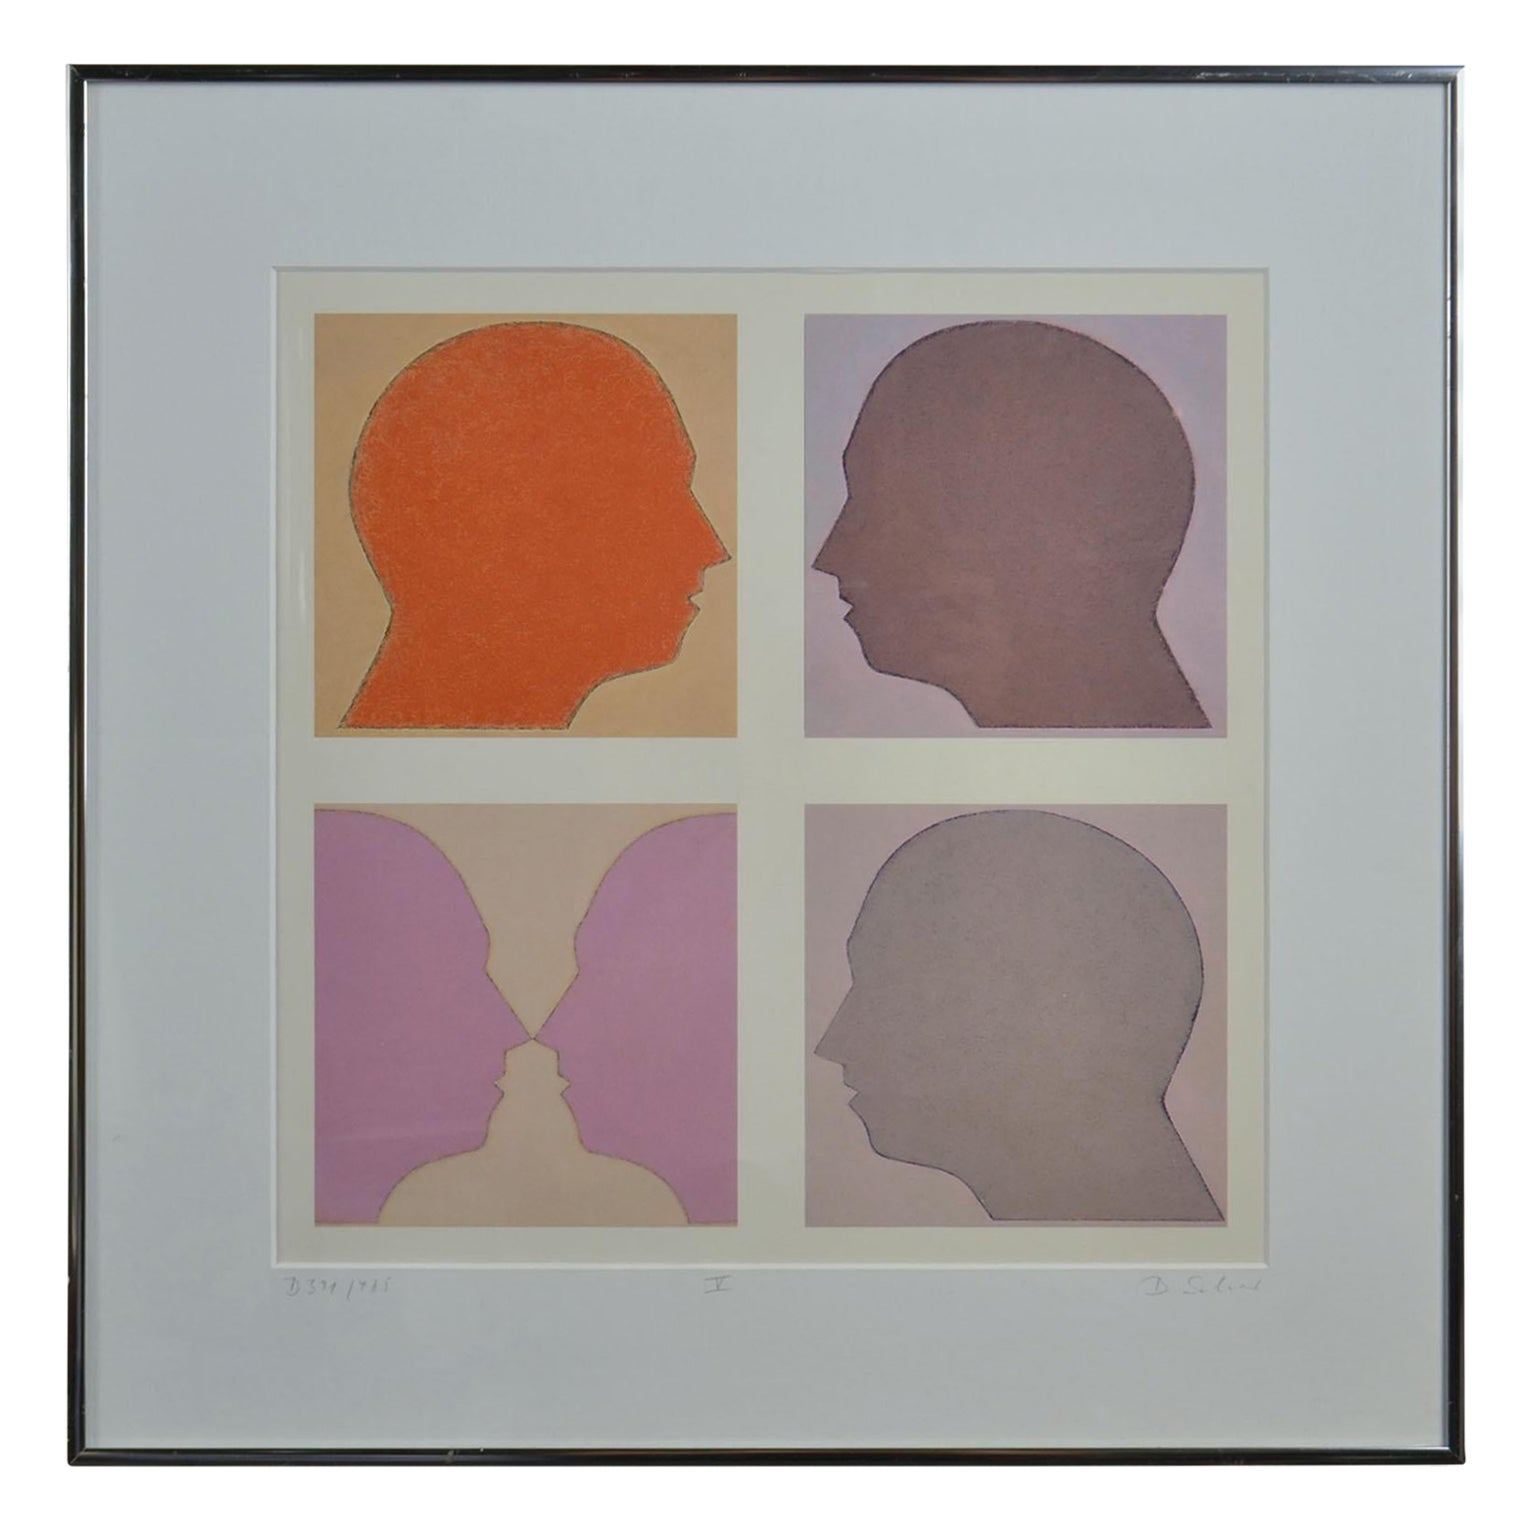 Lithograph of Silhouette Faces by Beate Selzer